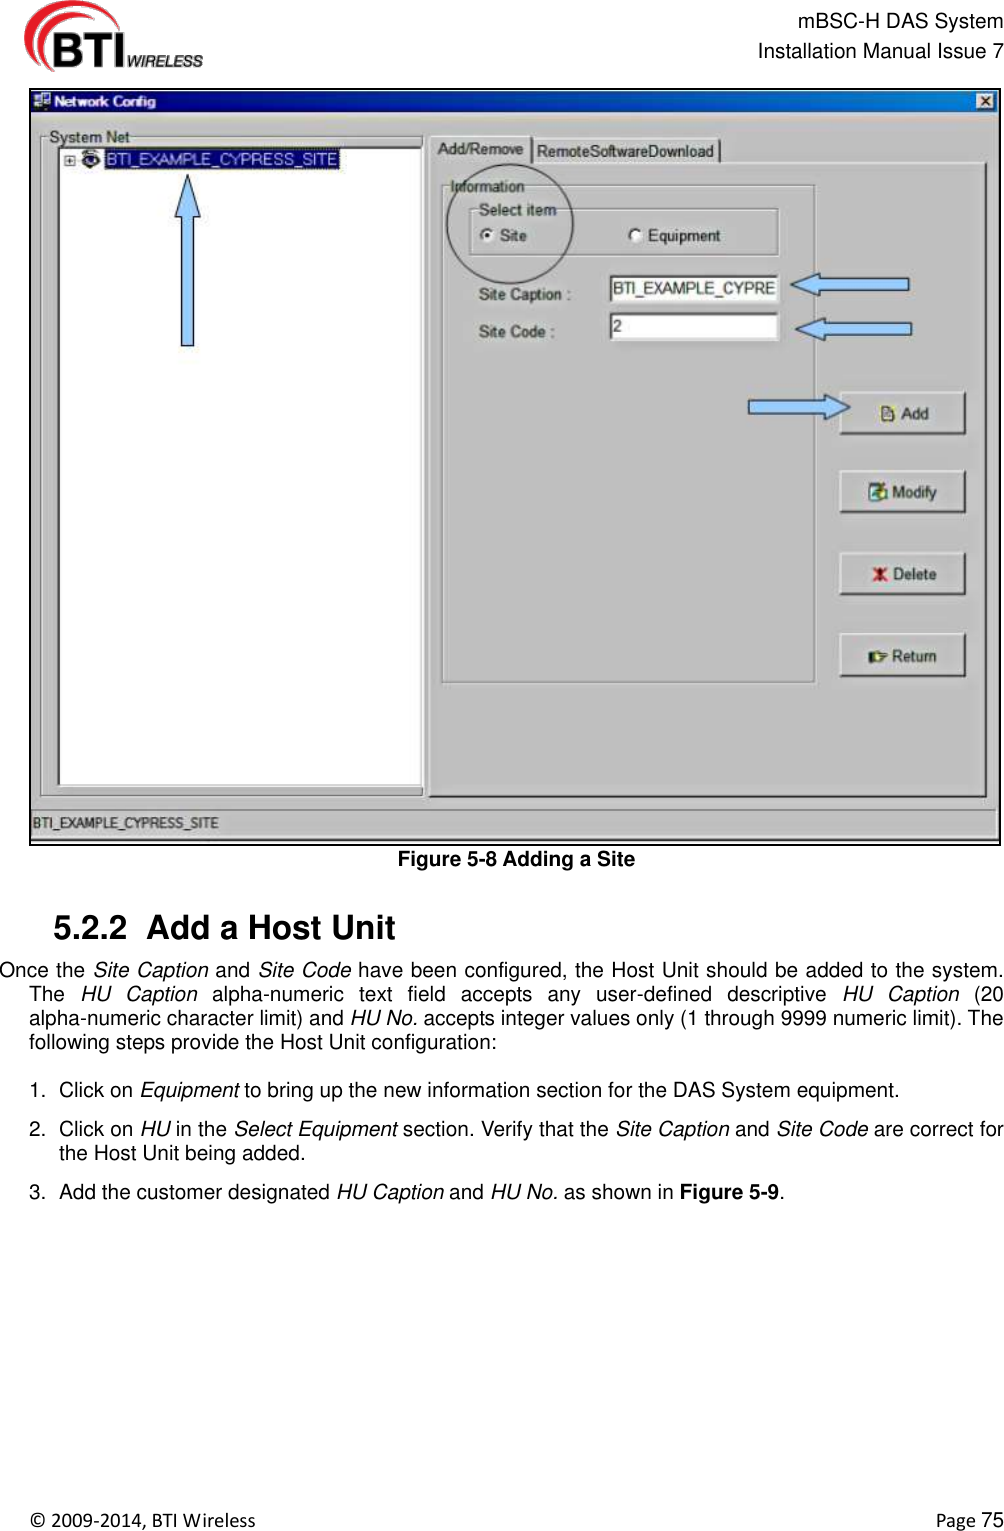                                                   mBSC-H DAS System   Installation Manual Issue 7  ©  2009-2014, BTI Wireless    Page 75  Figure 5-8 Adding a Site   5.2.2  Add a Host Unit Once the Site Caption and Site Code have been configured, the Host Unit should be added to the system. The  HU  Caption  alpha-numeric  text  field  accepts  any  user-defined  descriptive  HU  Caption  (20 alpha-numeric character limit) and HU No. accepts integer values only (1 through 9999 numeric limit). The following steps provide the Host Unit configuration:  1.  Click on Equipment to bring up the new information section for the DAS System equipment. 2.  Click on HU in the Select Equipment section. Verify that the Site Caption and Site Code are correct for the Host Unit being added. 3.  Add the customer designated HU Caption and HU No. as shown in Figure 5-9.  